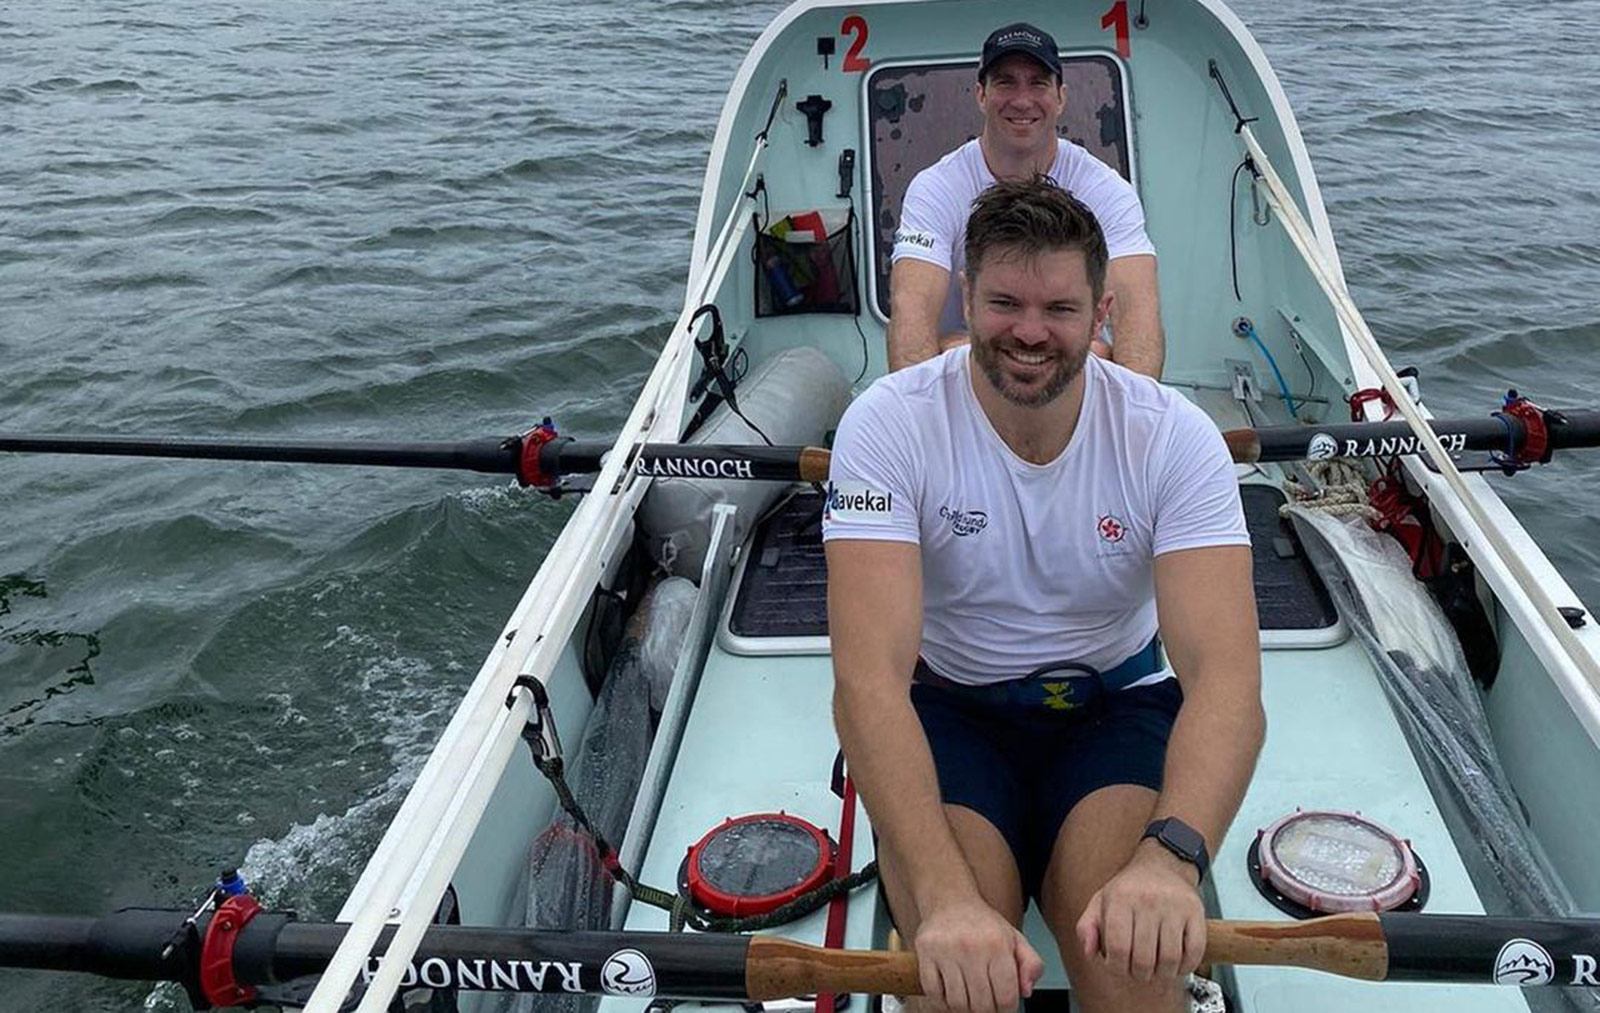 east rows west athletes training to row the atlantic